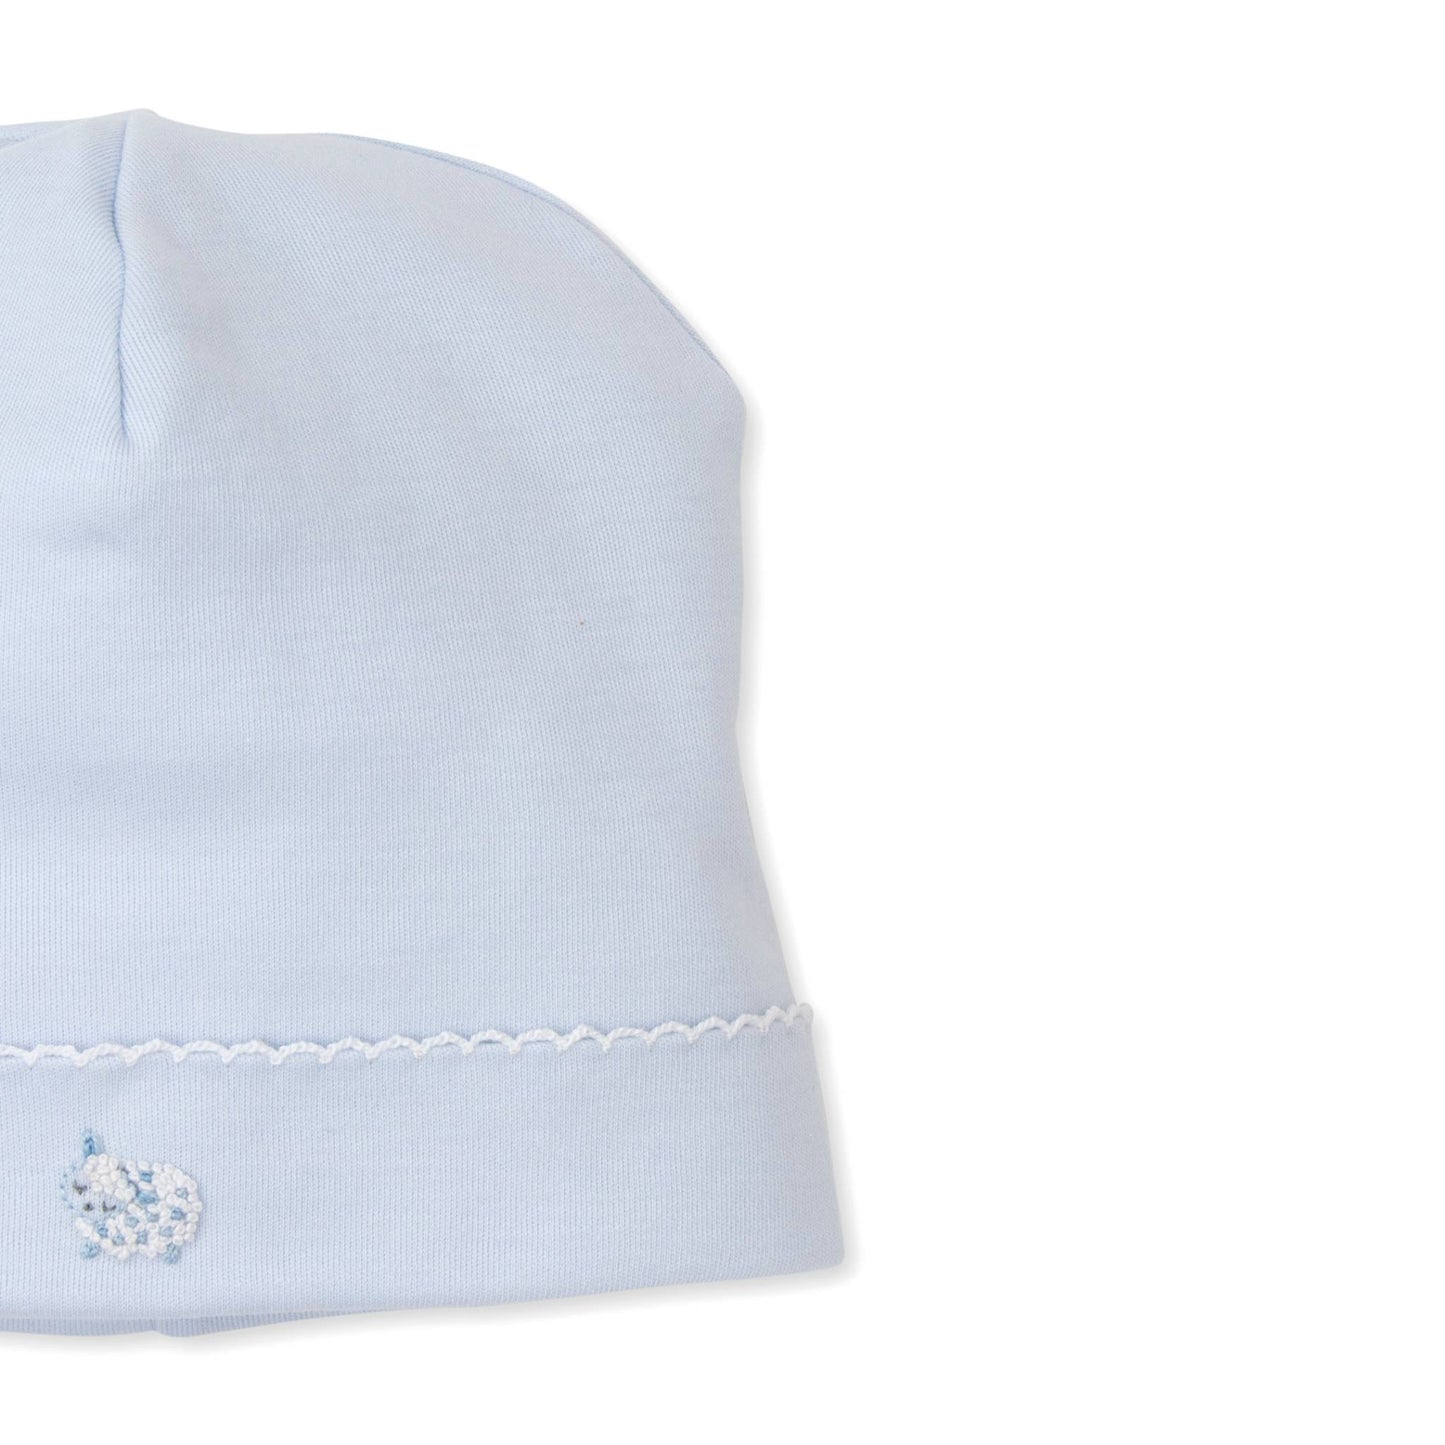 Boys Fleecy Sheep Hat with Hand Embroidery